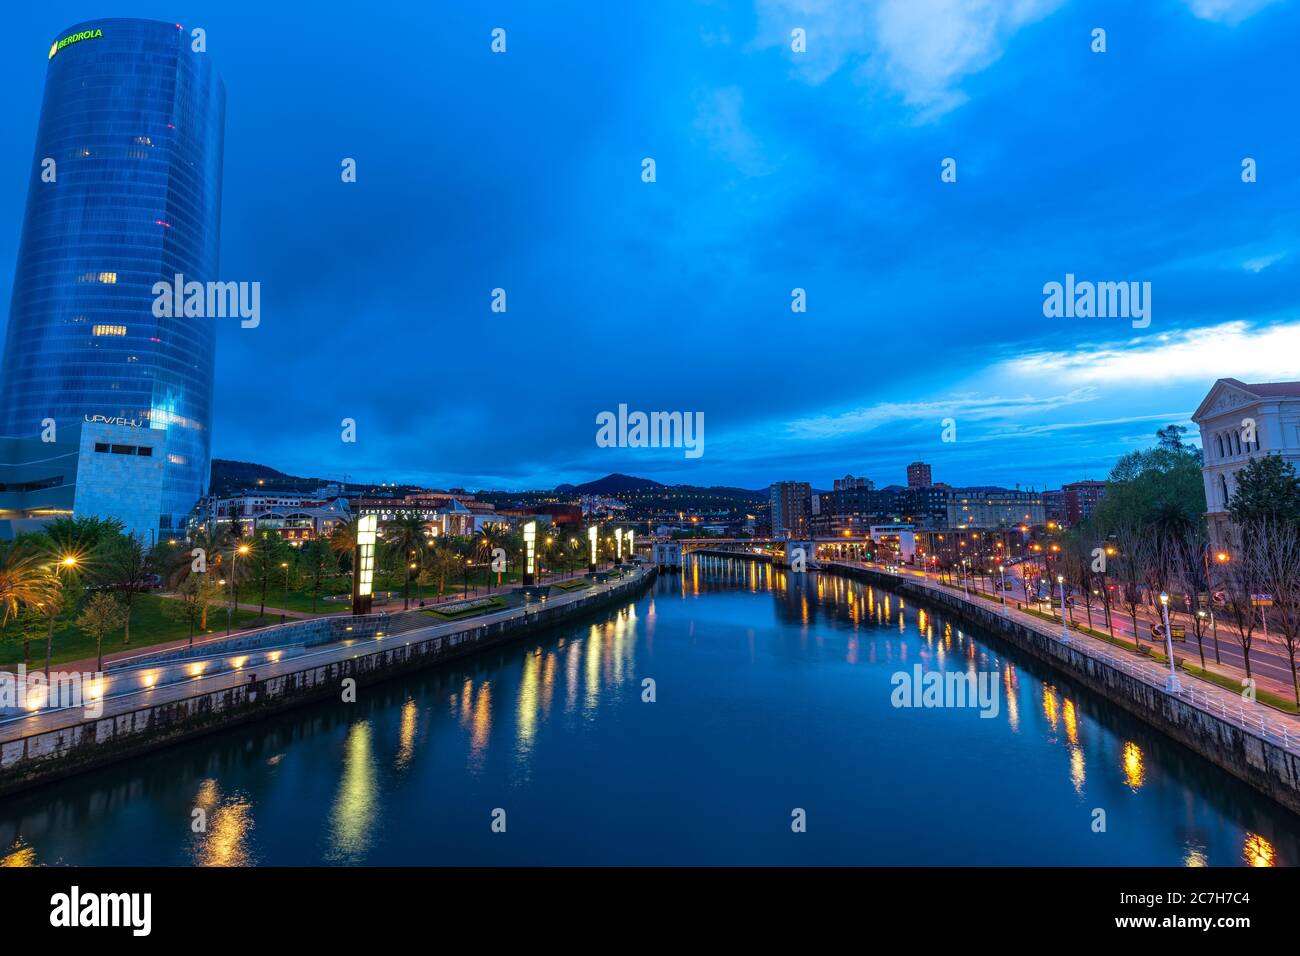 Europe, Spain, Basque Country, Vizcaya Province, Bilbao, view from the Pedro Arrupe Bridge over the Nervión and the evening Bilbao Stock Photo